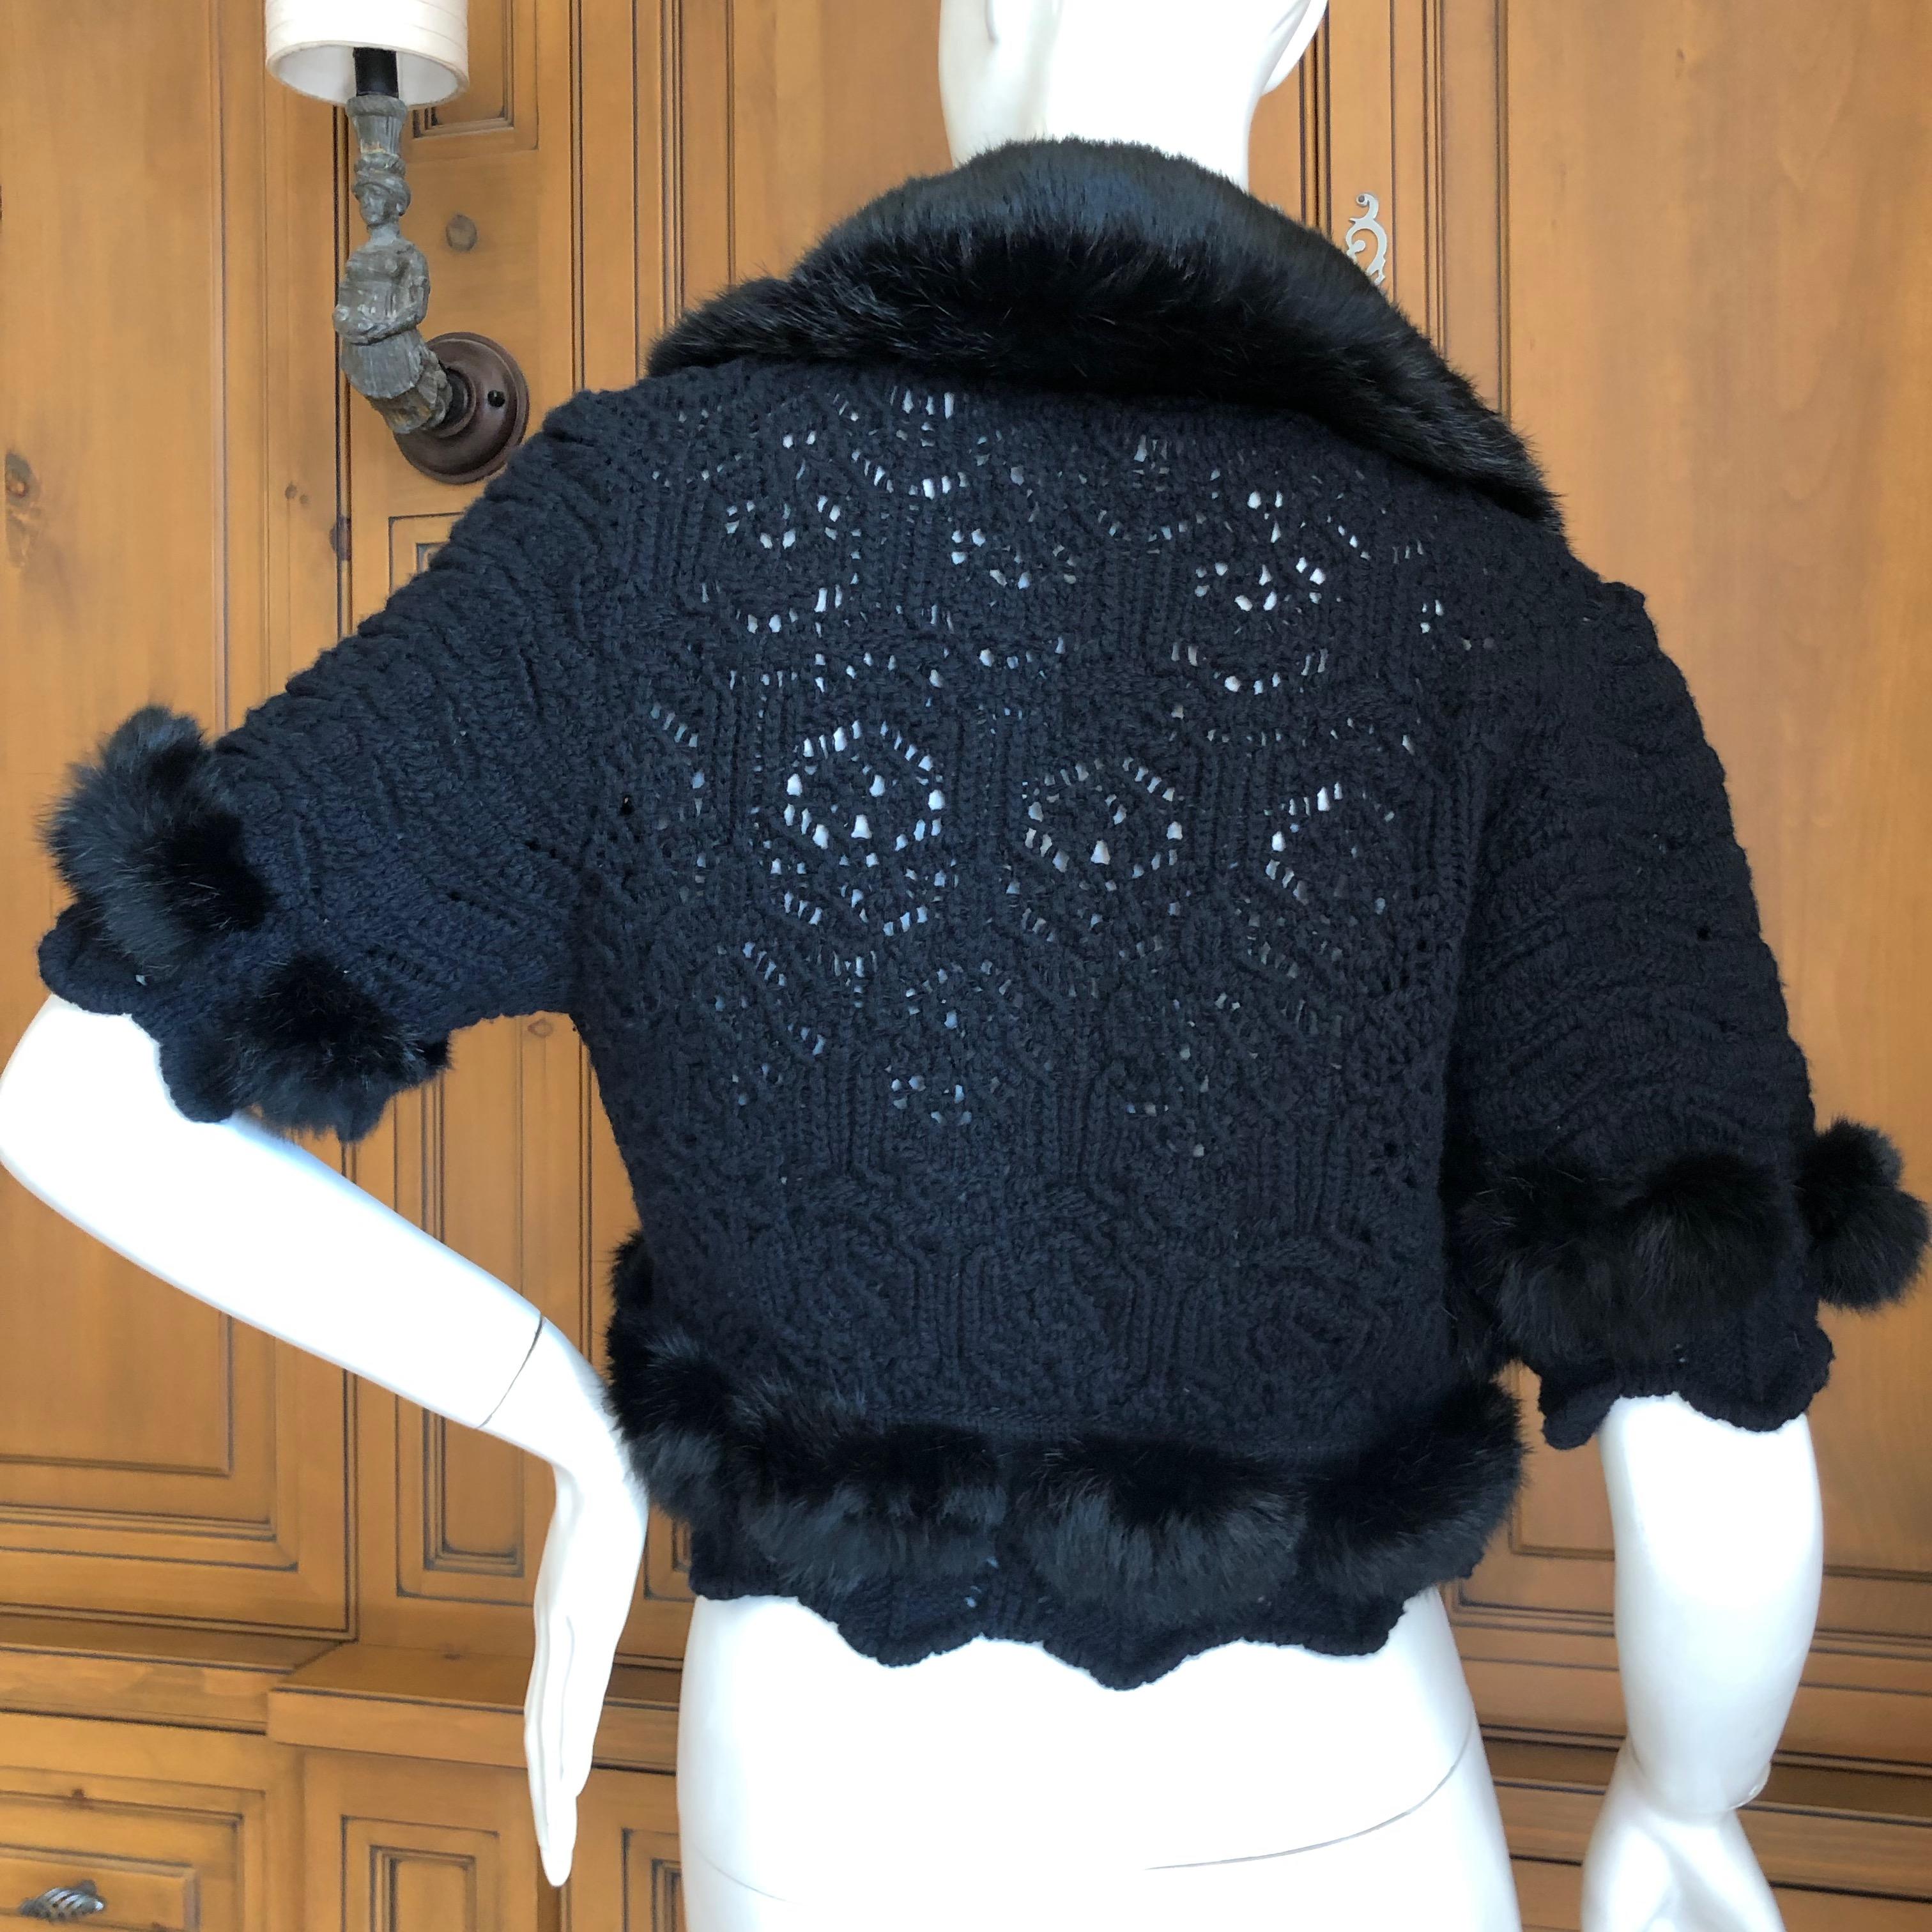  Christian Dior by John Galliano Fur Trimmed Open Weave Knit Black Sweater  For Sale 4